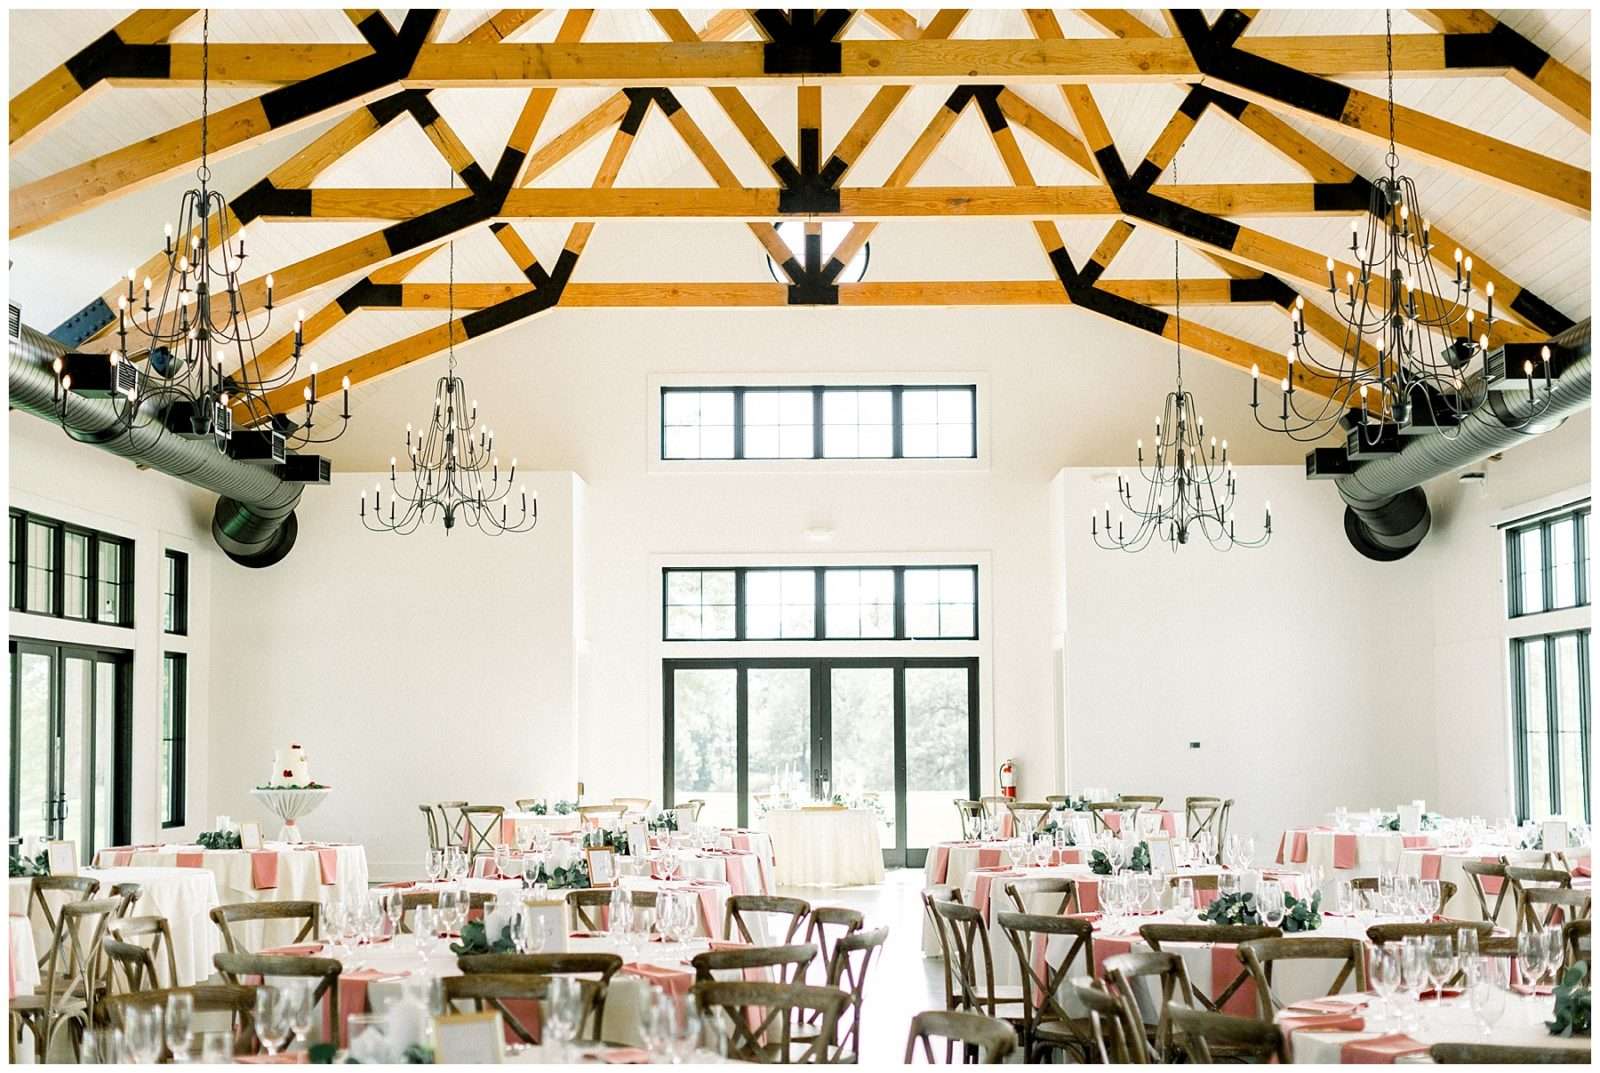 The Carriage House Reception Sites, Rehearsal Dinners